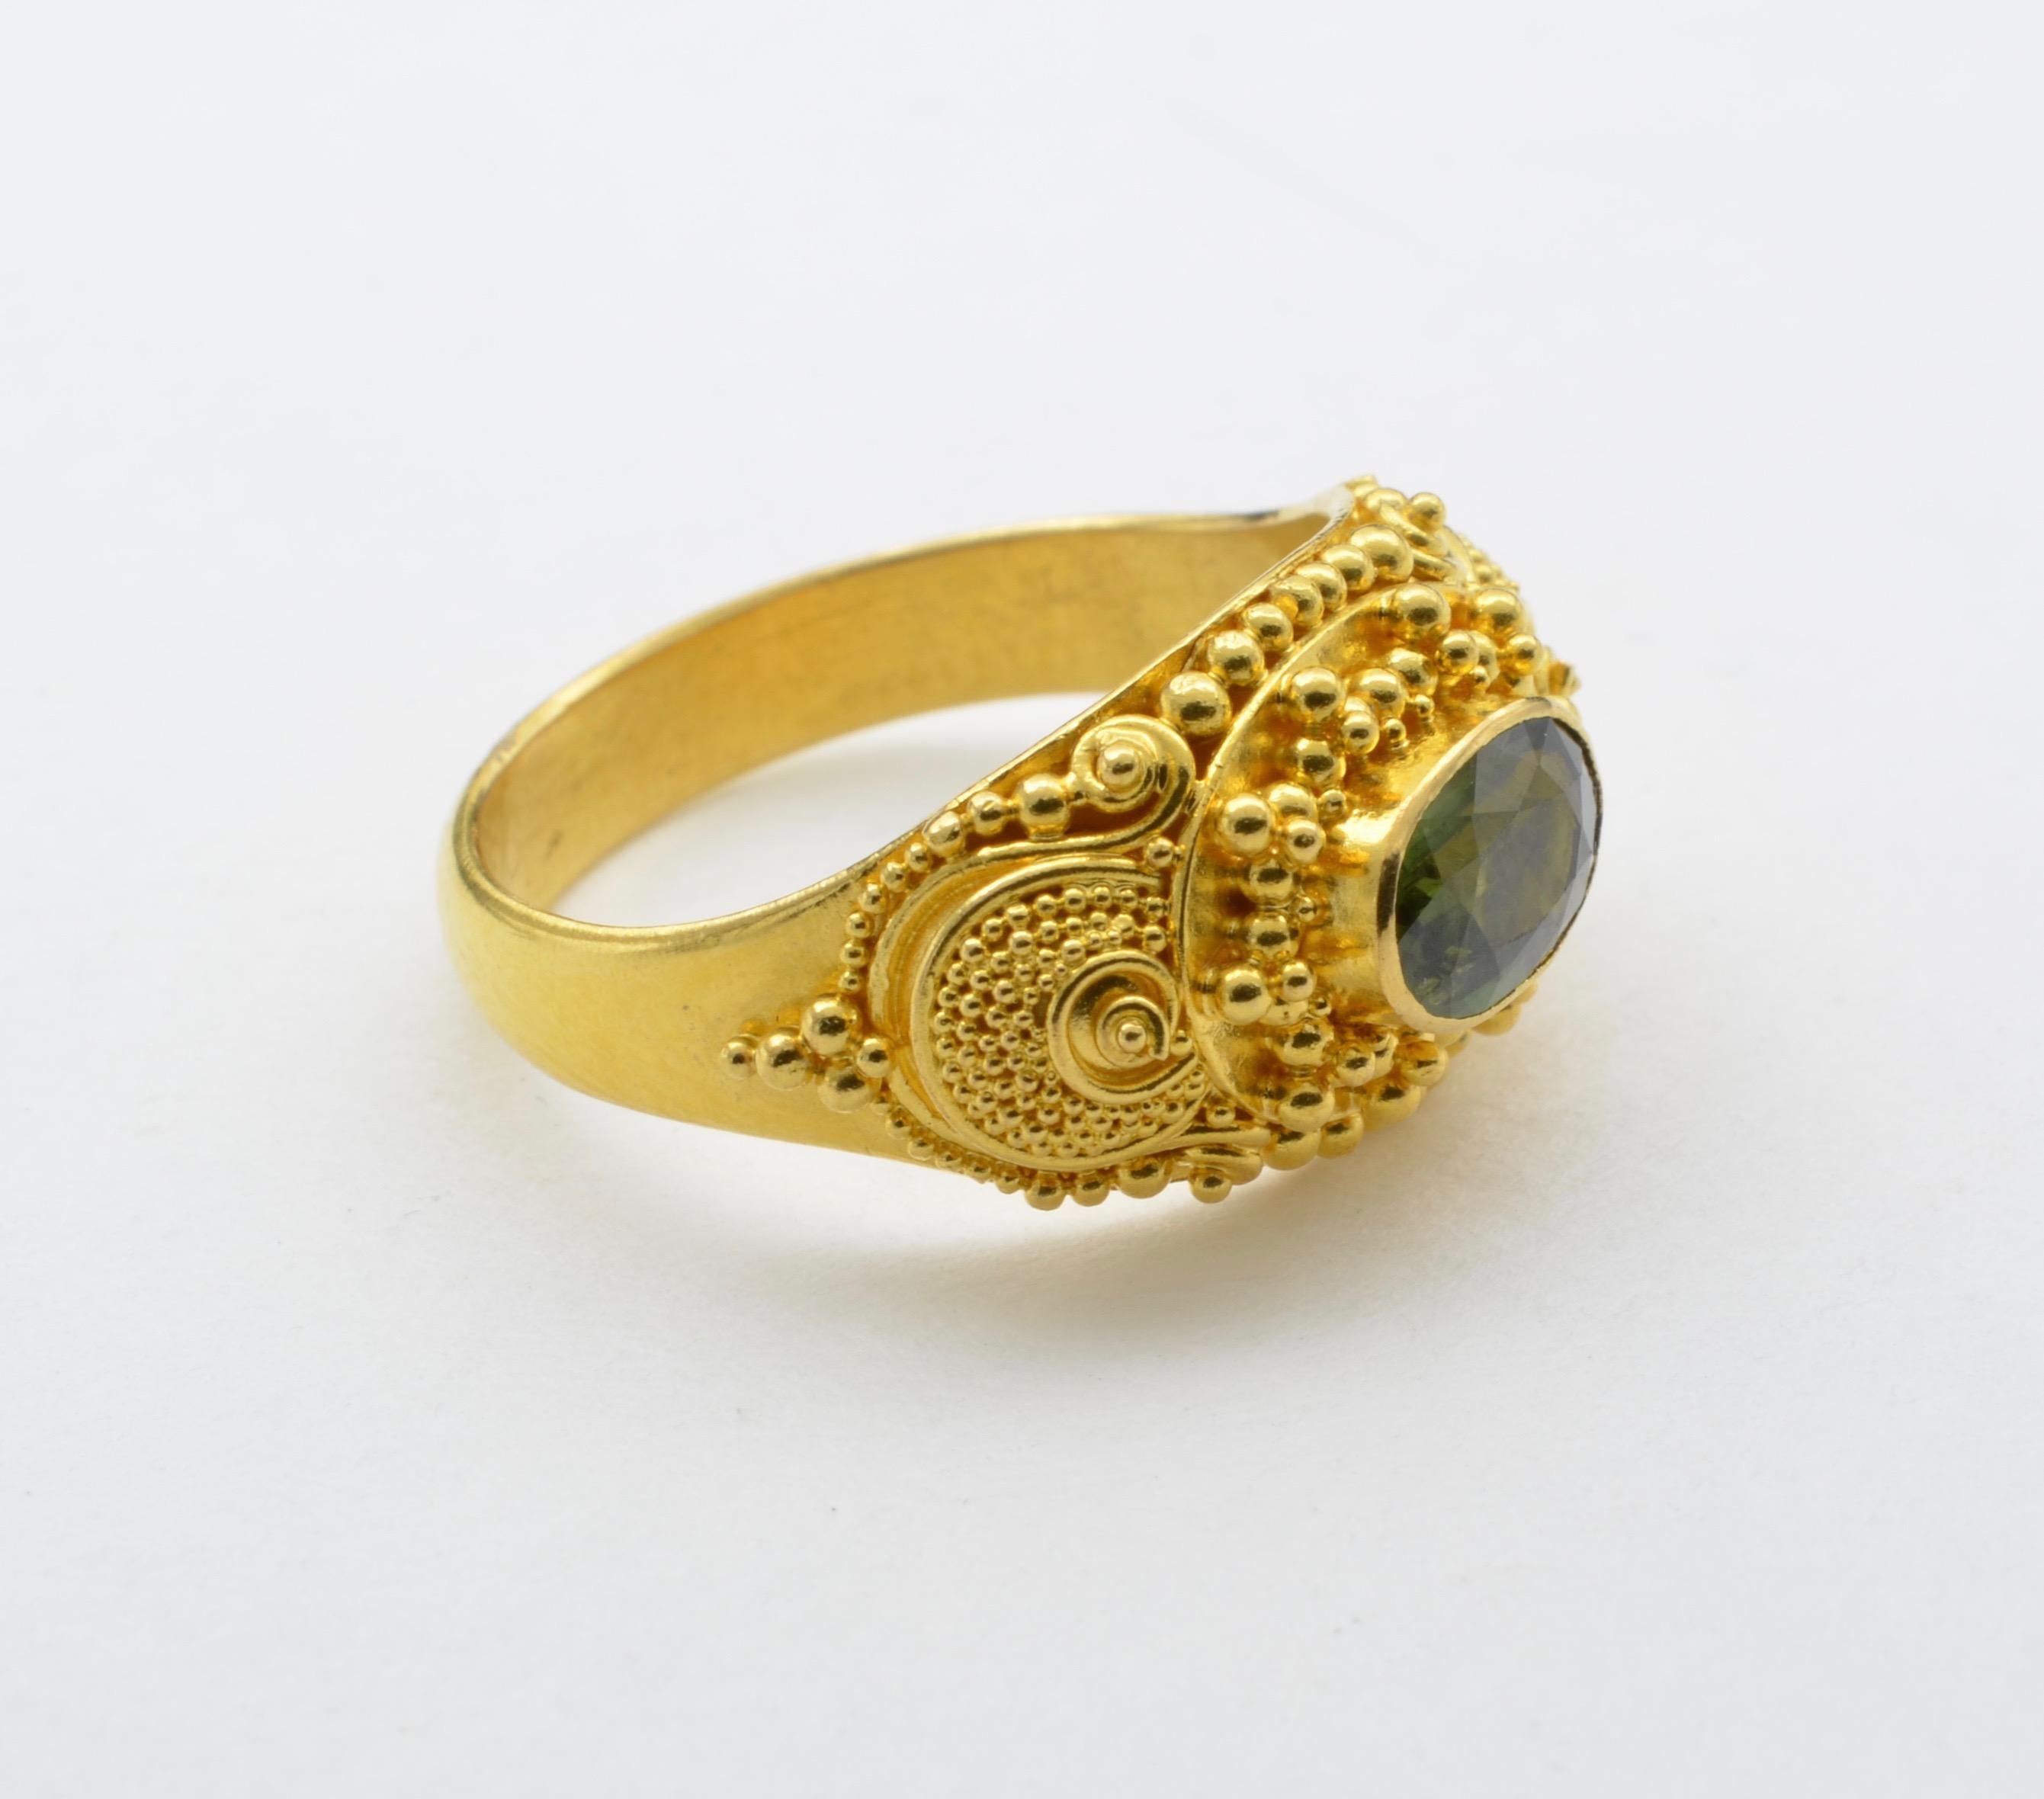 Green ‘Approximate 1.0 Carat’ Tourmaline Ring in 22 Karat Gold with Granulation For Sale 1